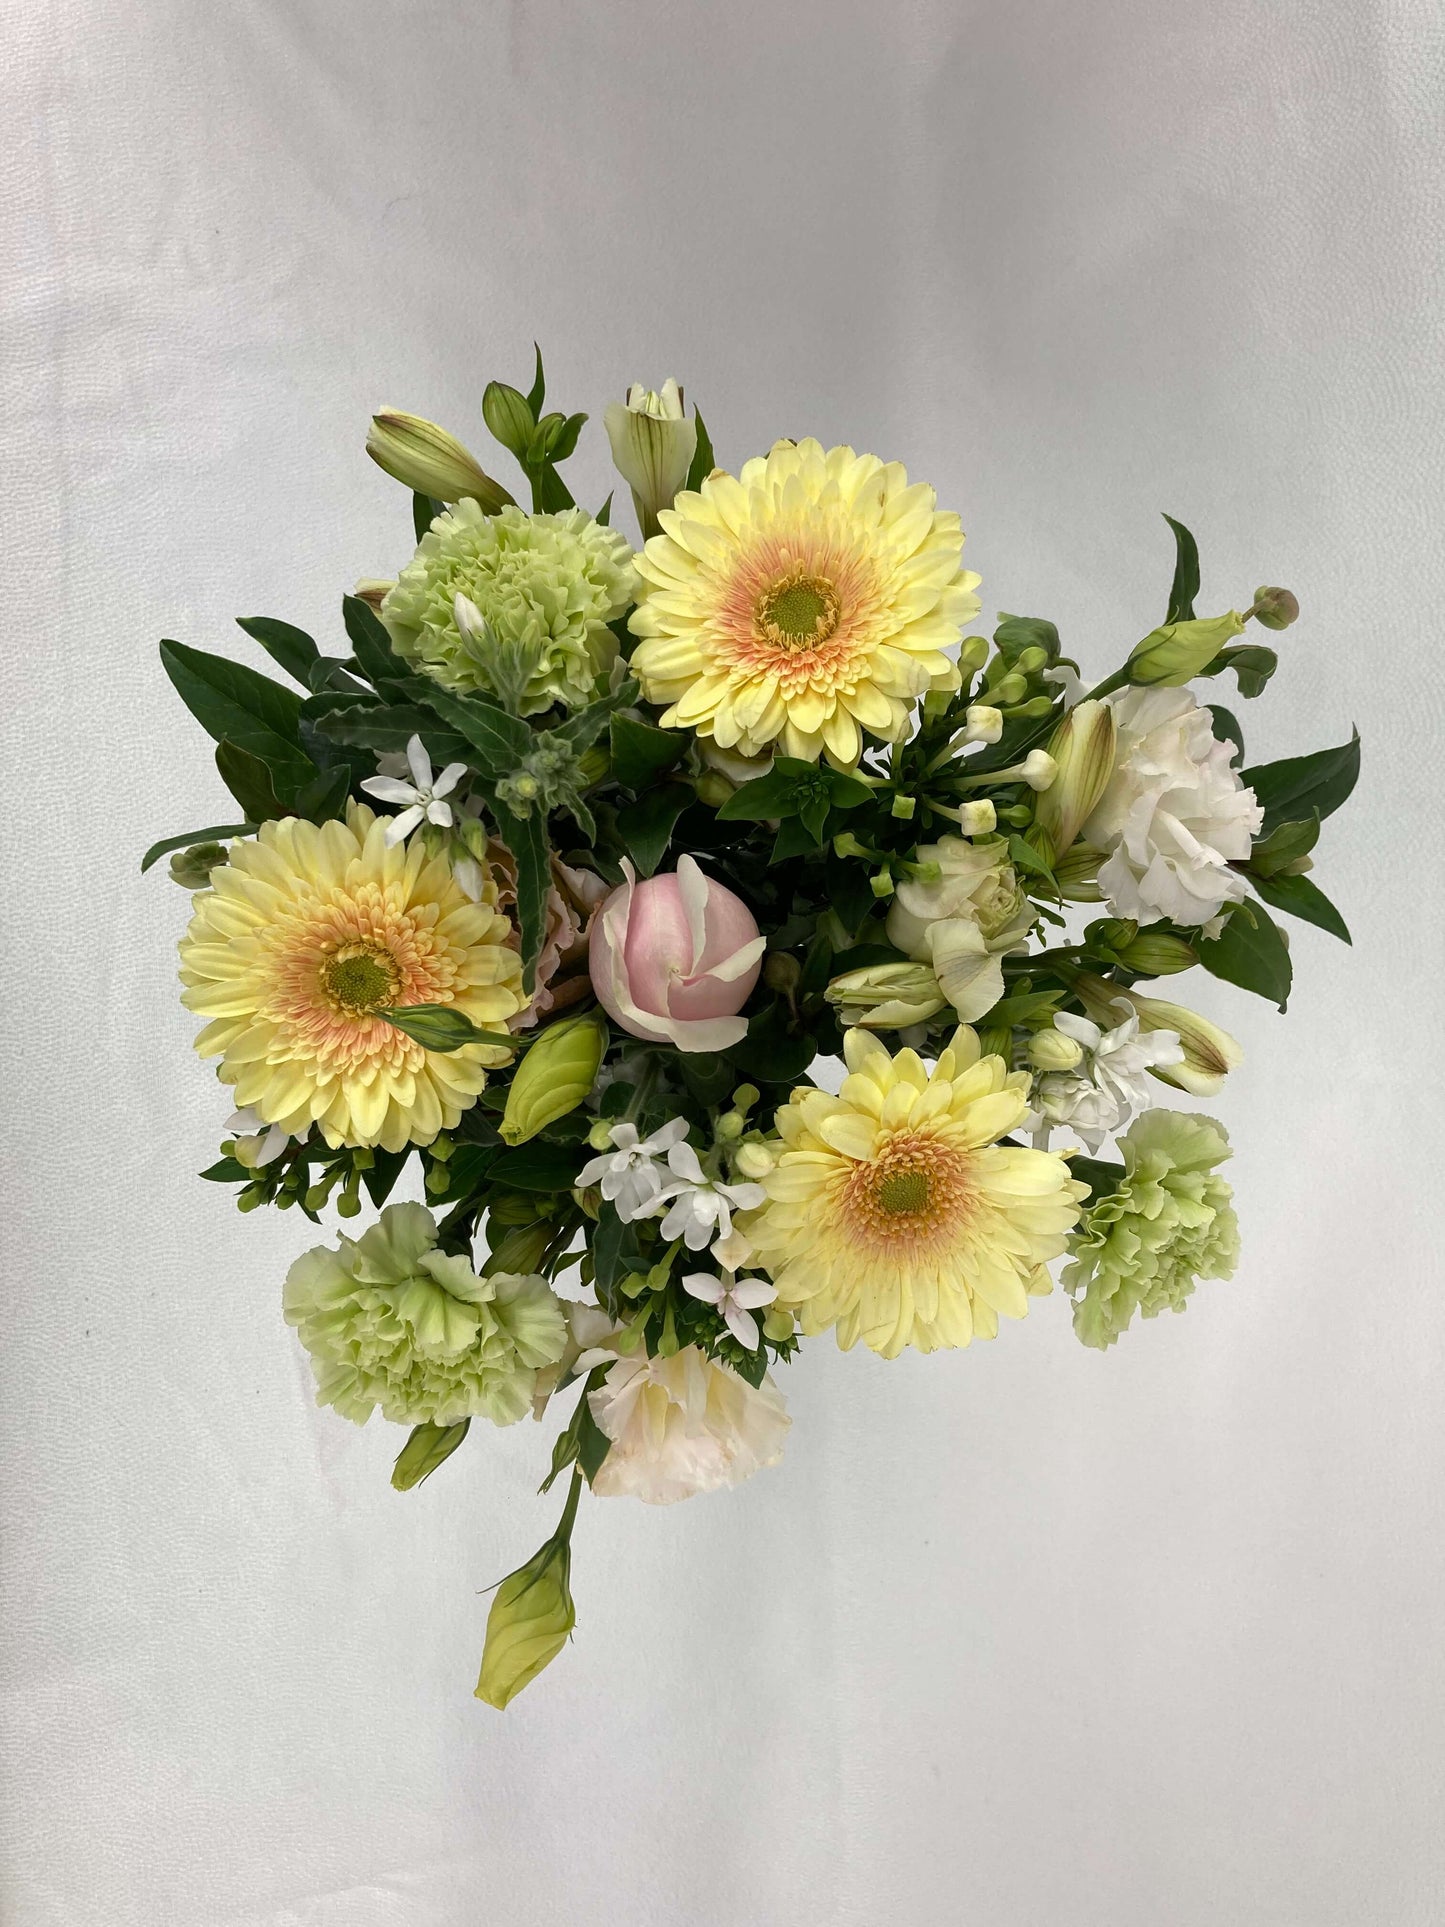 Our pastel posy from above